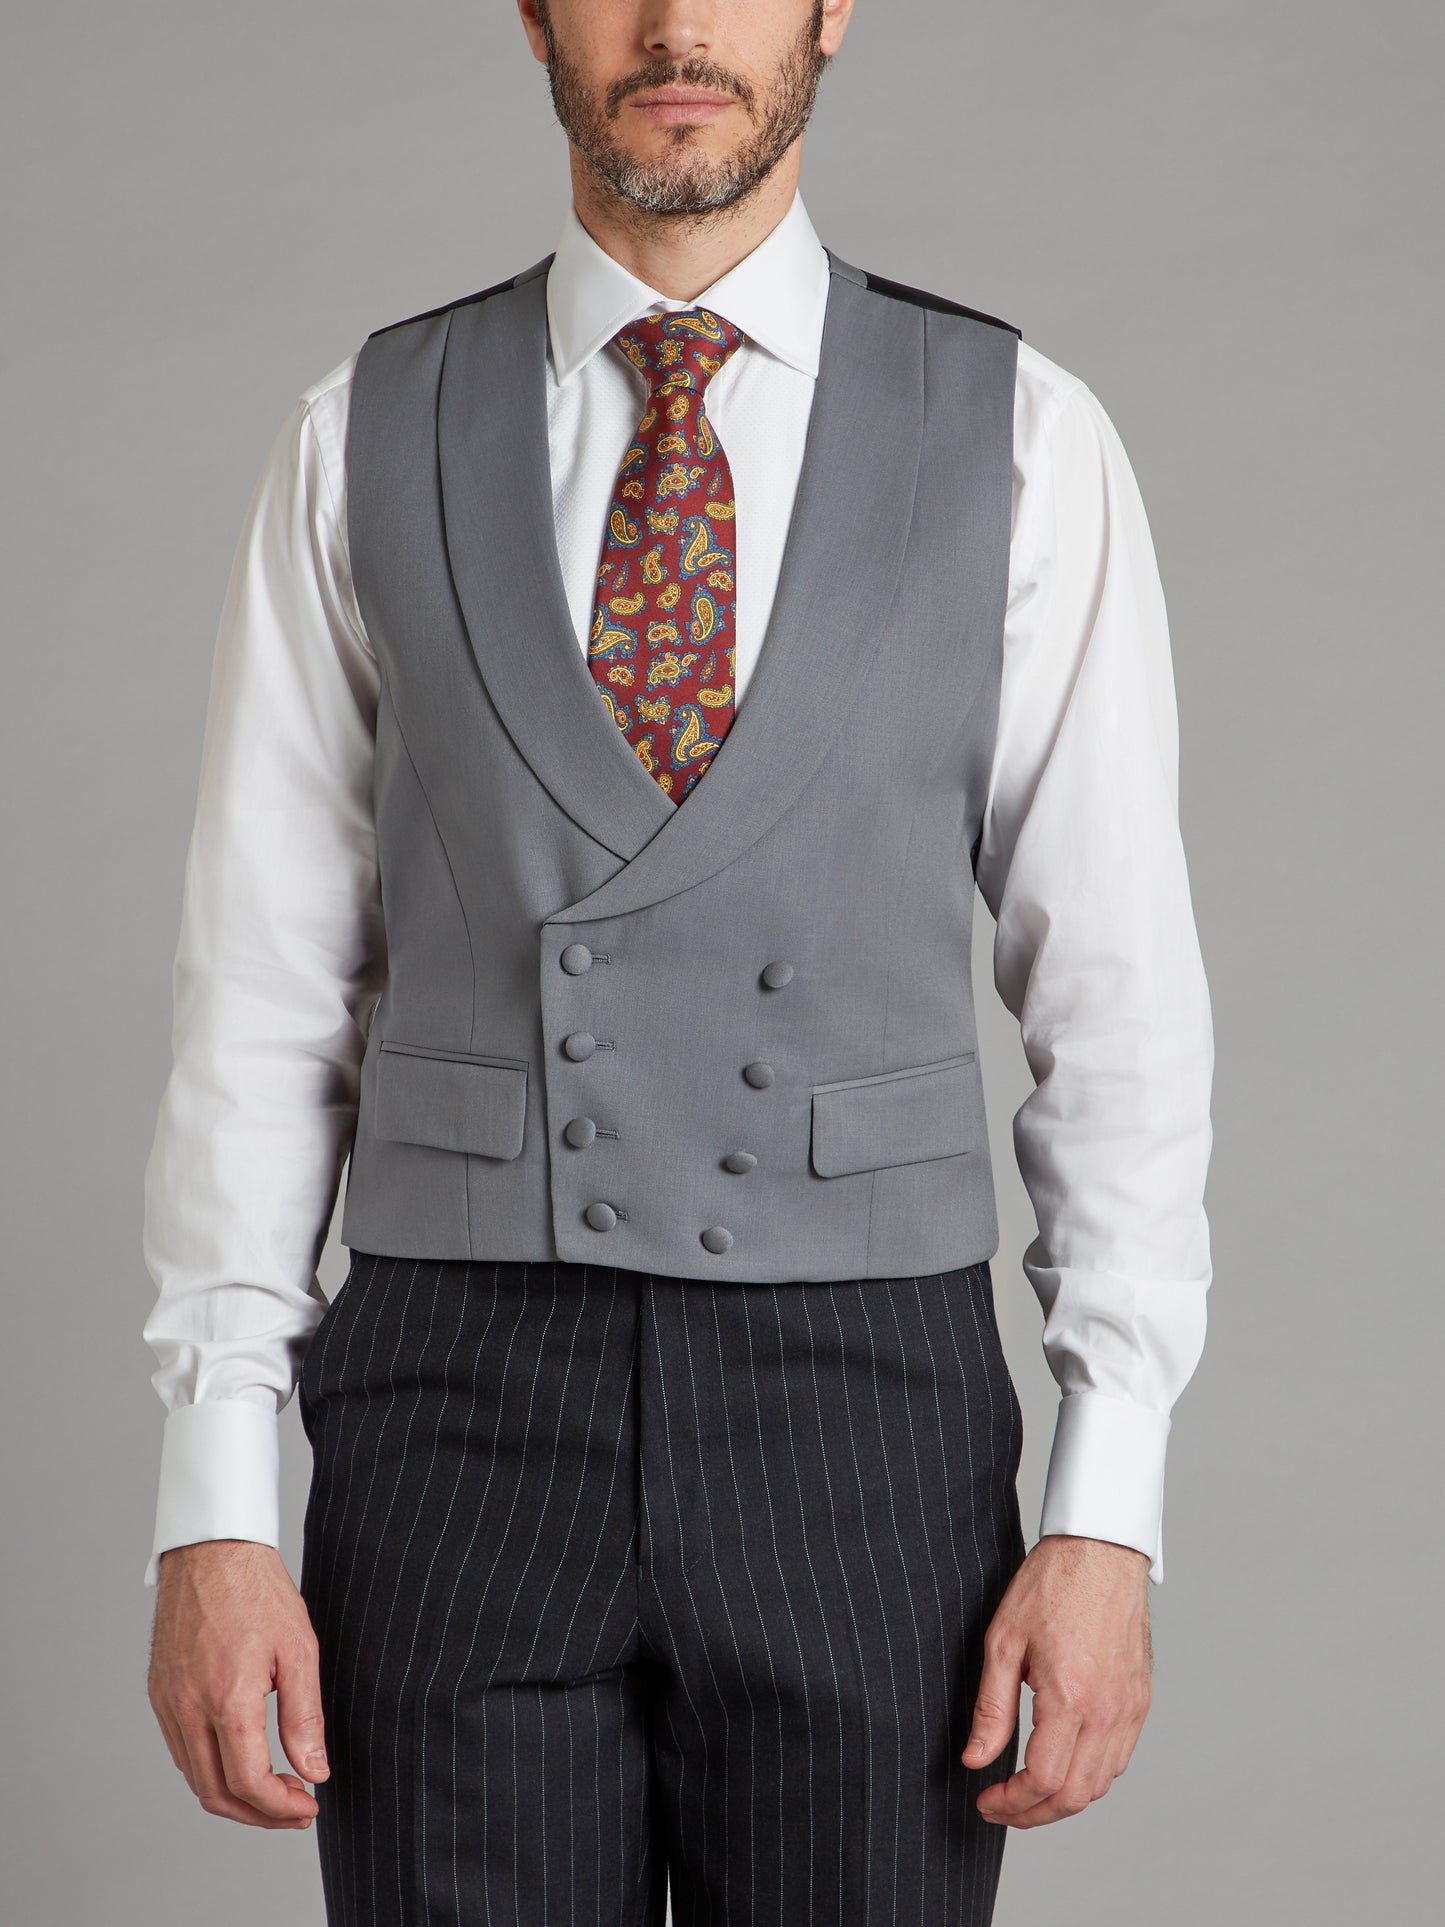 Limited Edition Luxury Double Breasted Wool Waistcoat - Light Grey